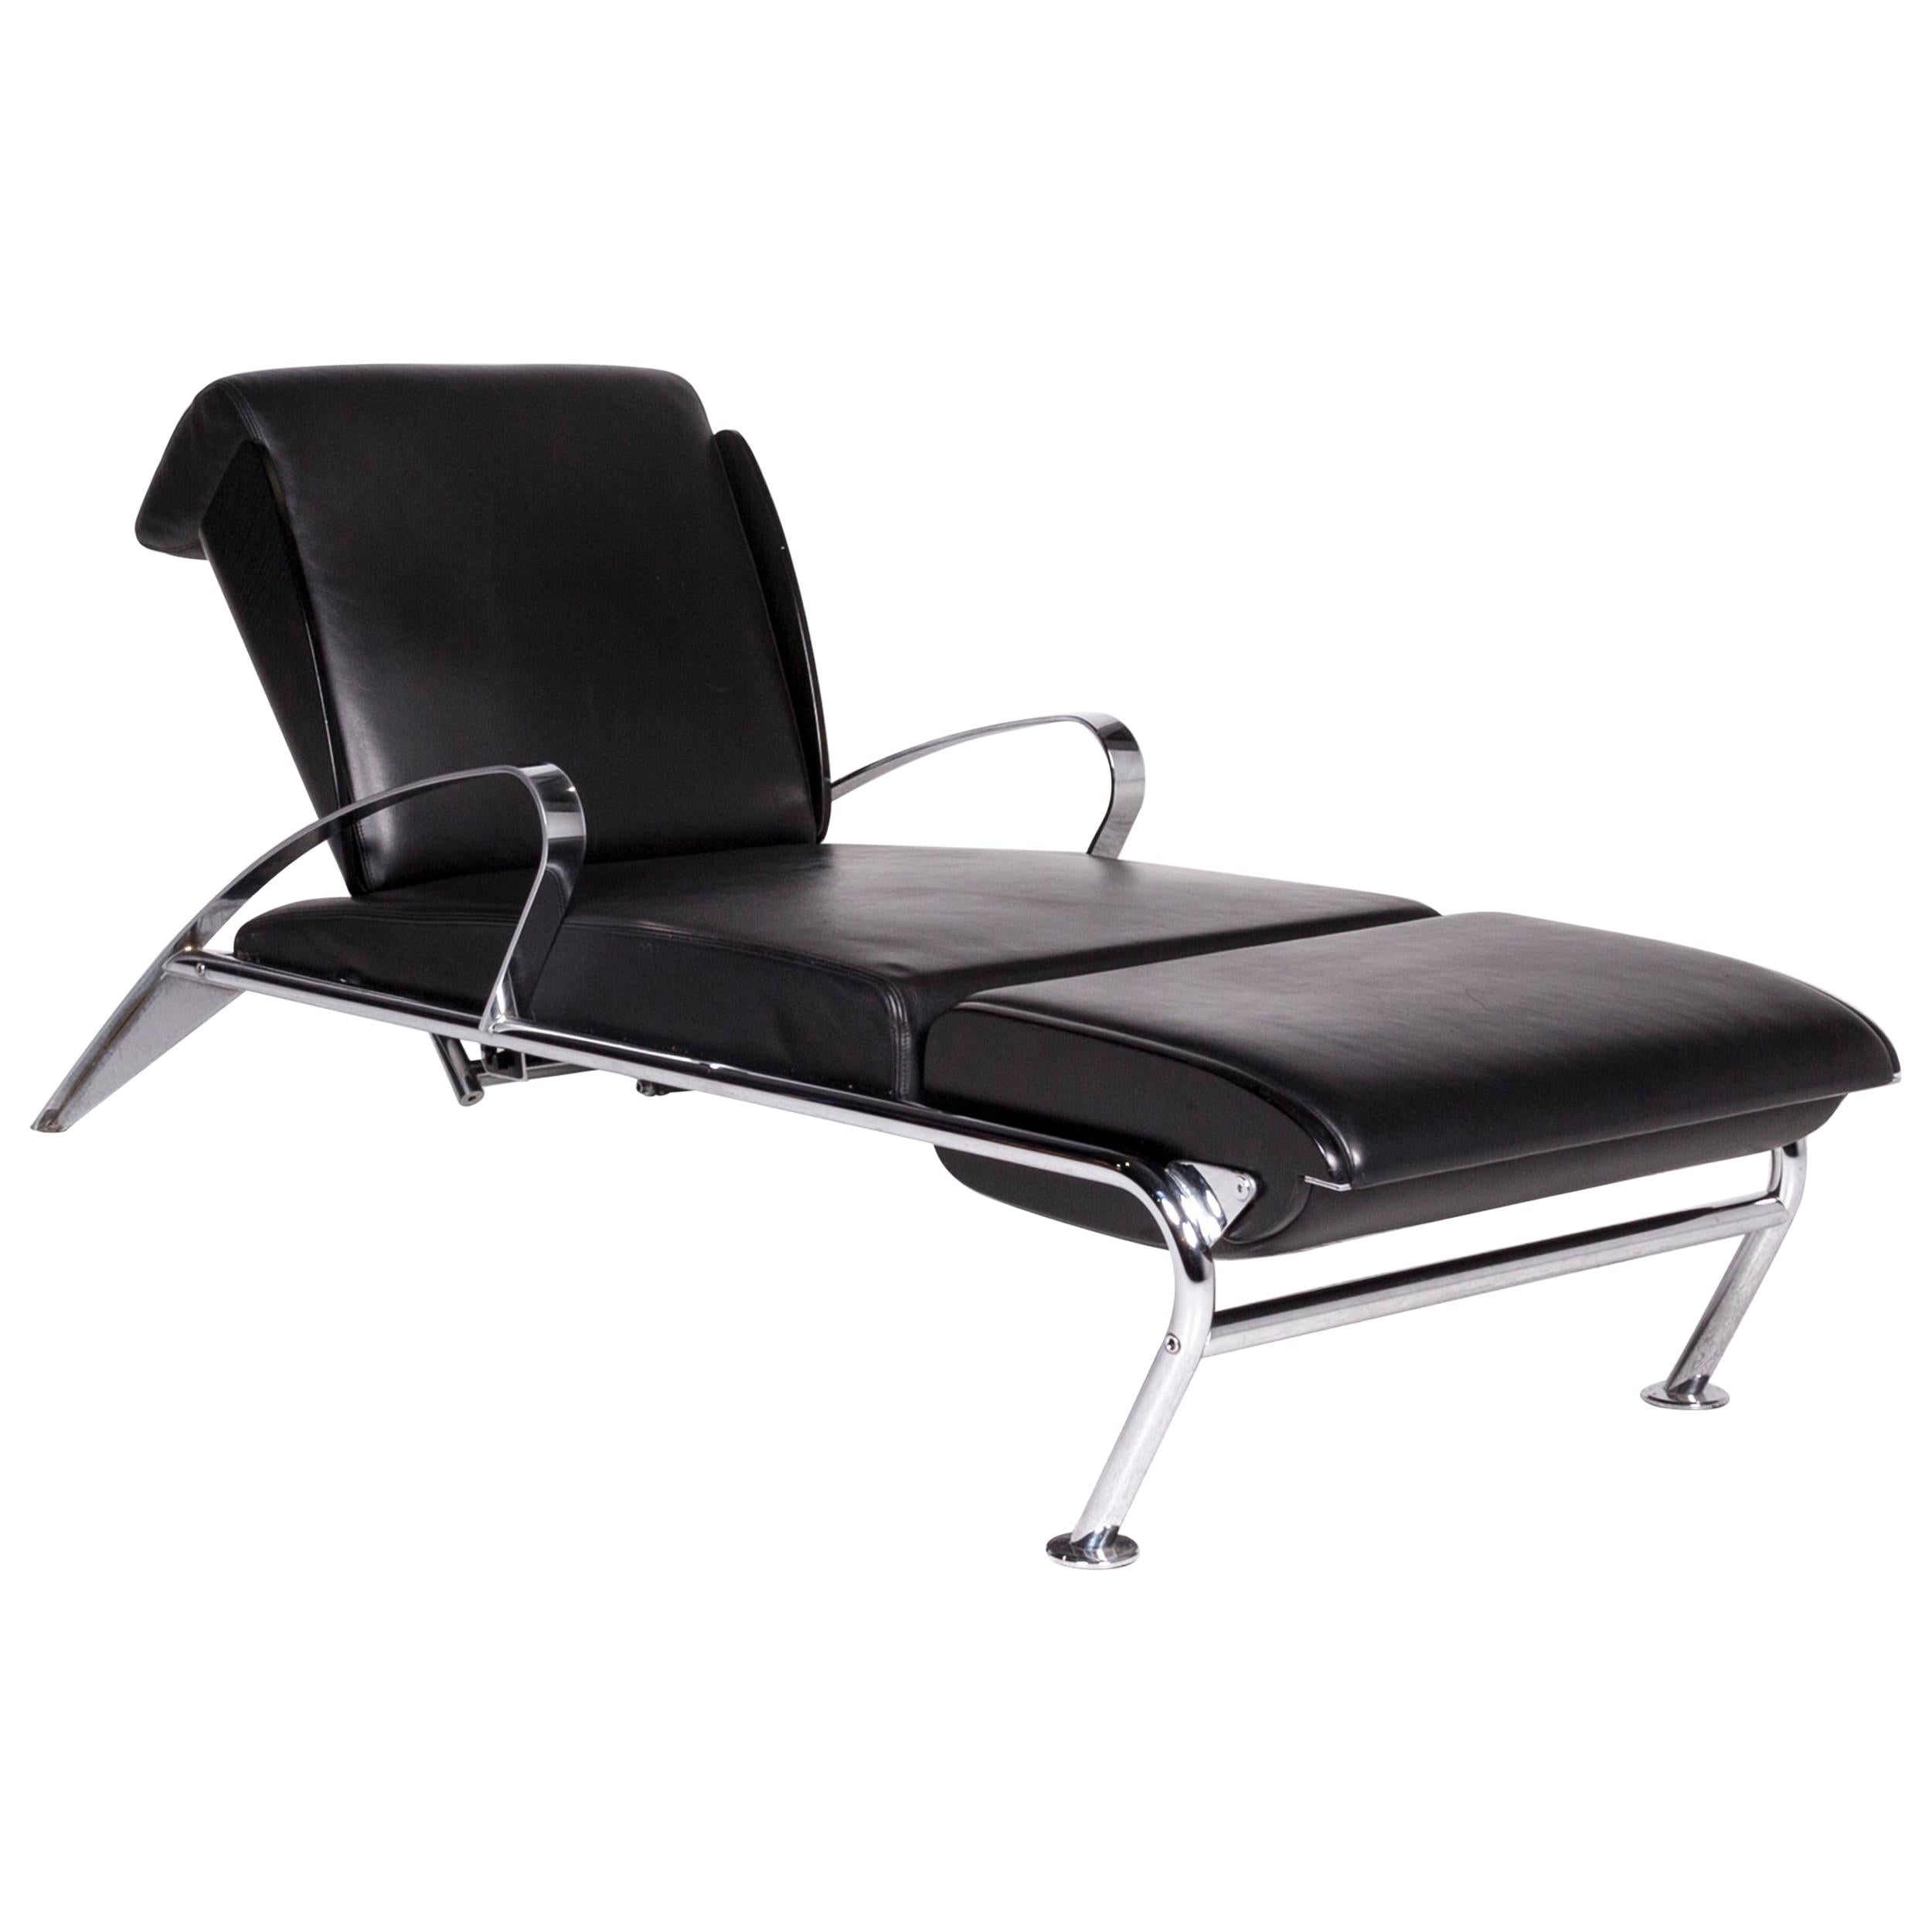 Moroso Massimo Leather Lounger Black Relax function For Sale